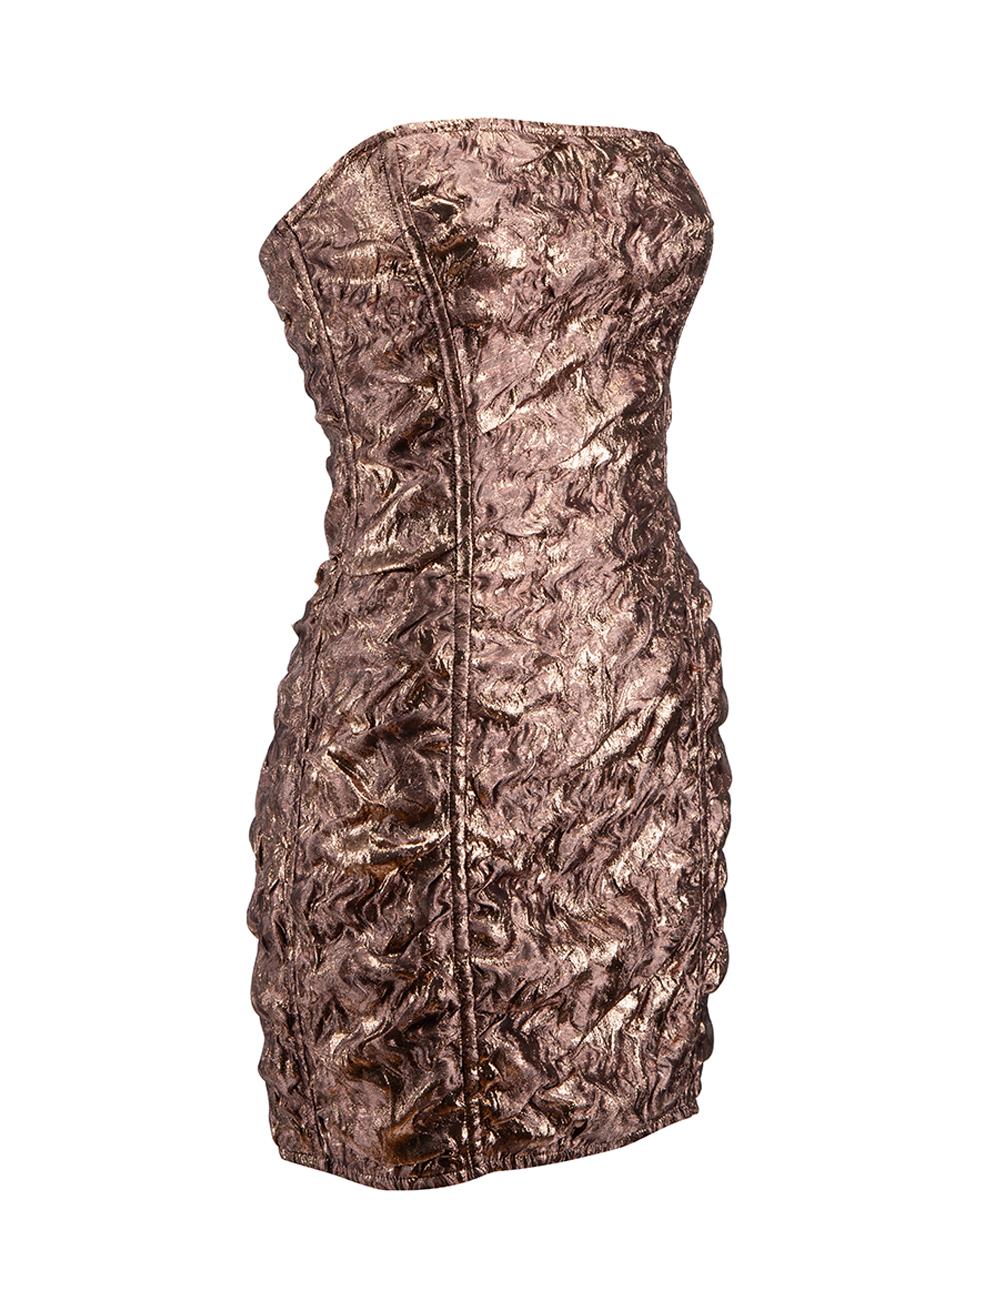 CONDITION is Never worn, with tags. Minor pulls in outer fabric due to poor storage of this new Redemption designer resale item.

Details


Darien model

Metallic

Synthetic

Dress

Strapless

Mini

Boned bodice

Figure hugging fit

Side zip and